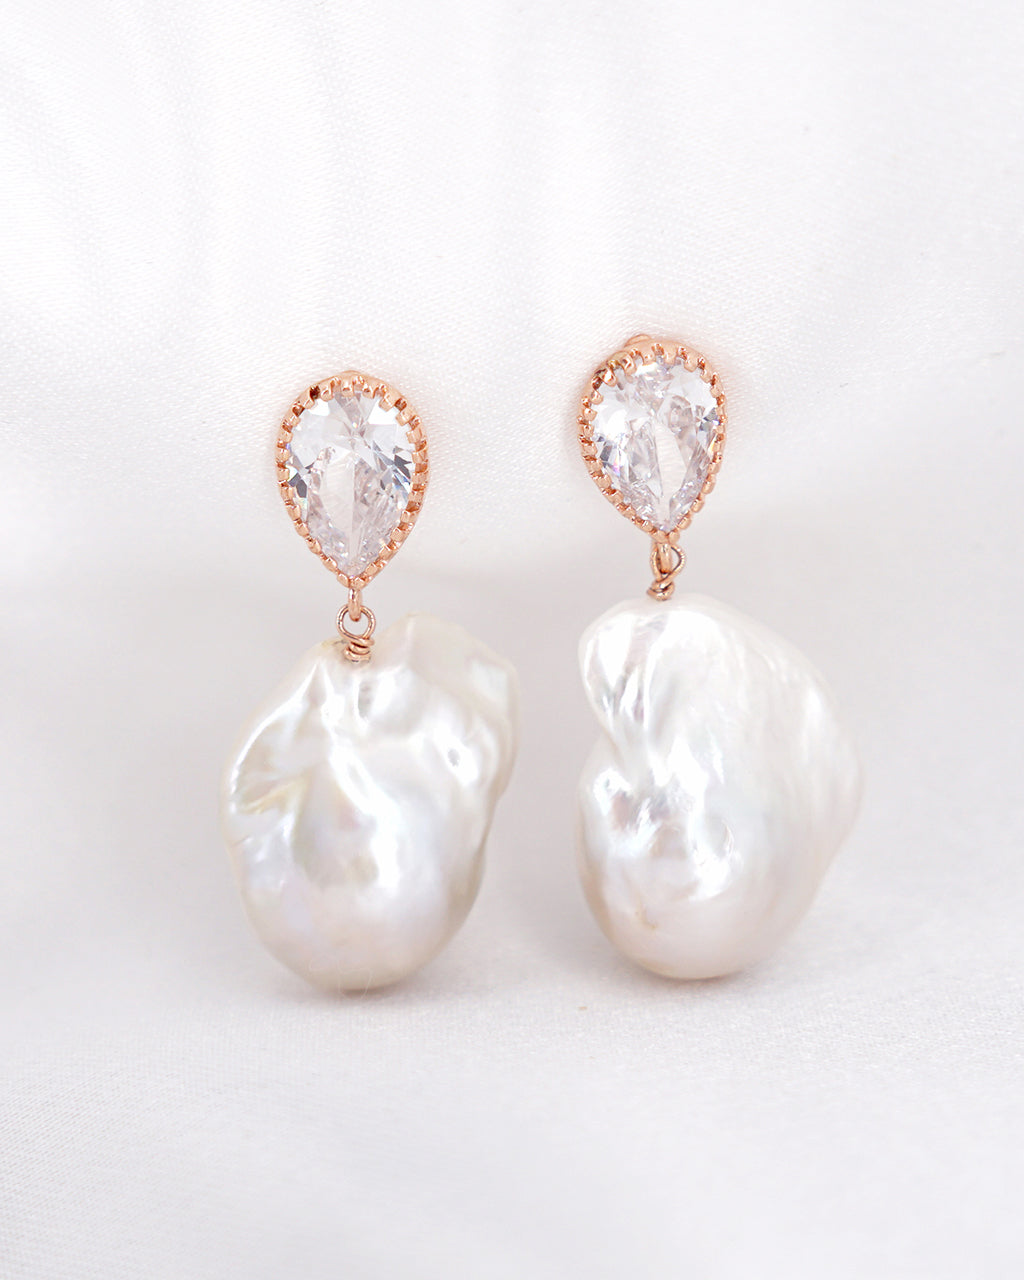 White Baroque Pearl Earrings - Teardrop - Wedding Bridal Jewelry for Brides and Bridesmaids | Baroque Pearl Jewelry for Mother's Day Gifts